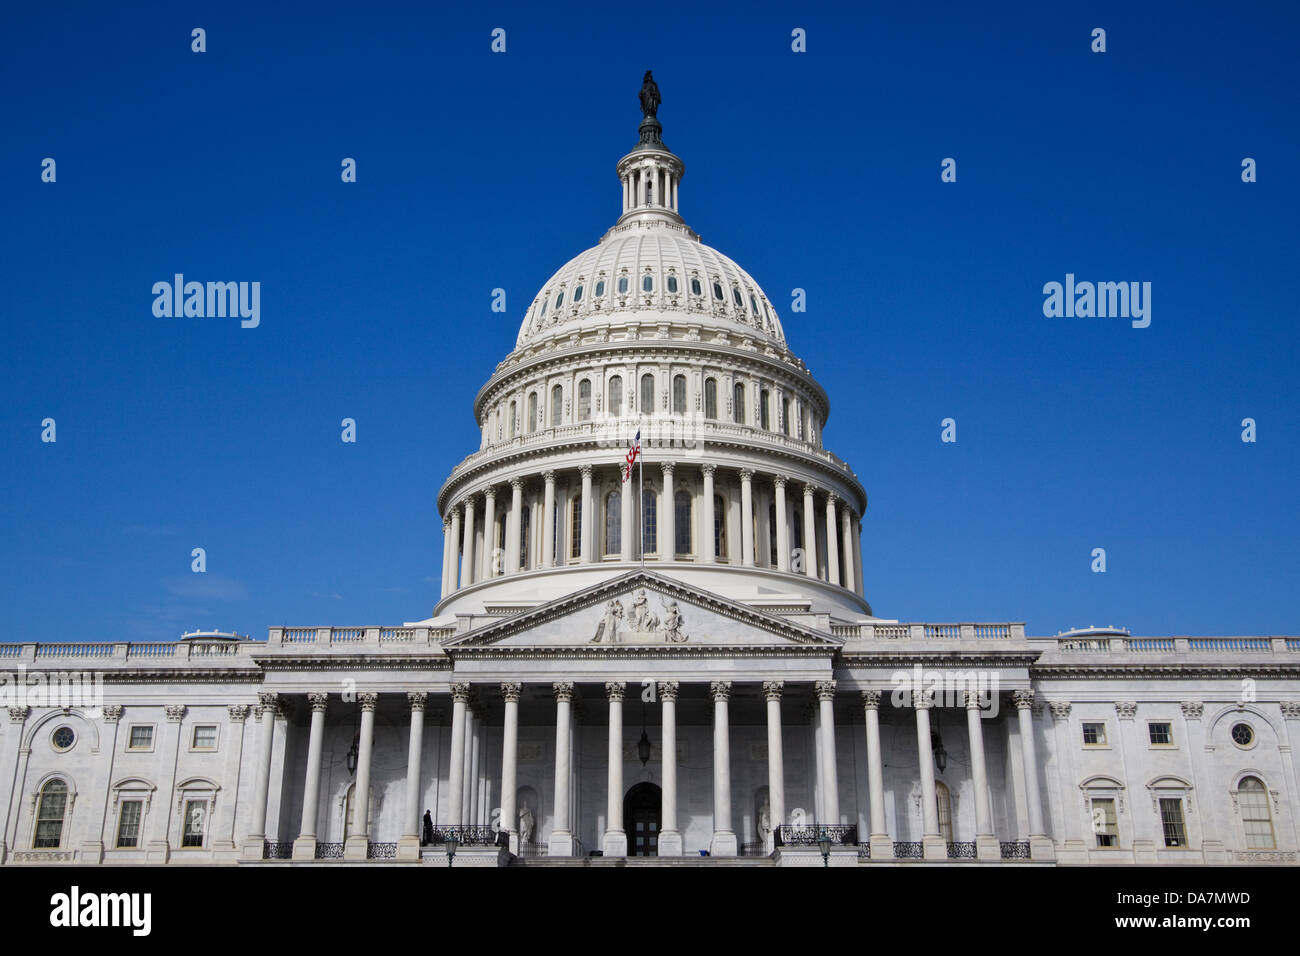 The US Capitol building in Washington, DC, as viewed from East Plaza; against a clear blue sky Stock Photo